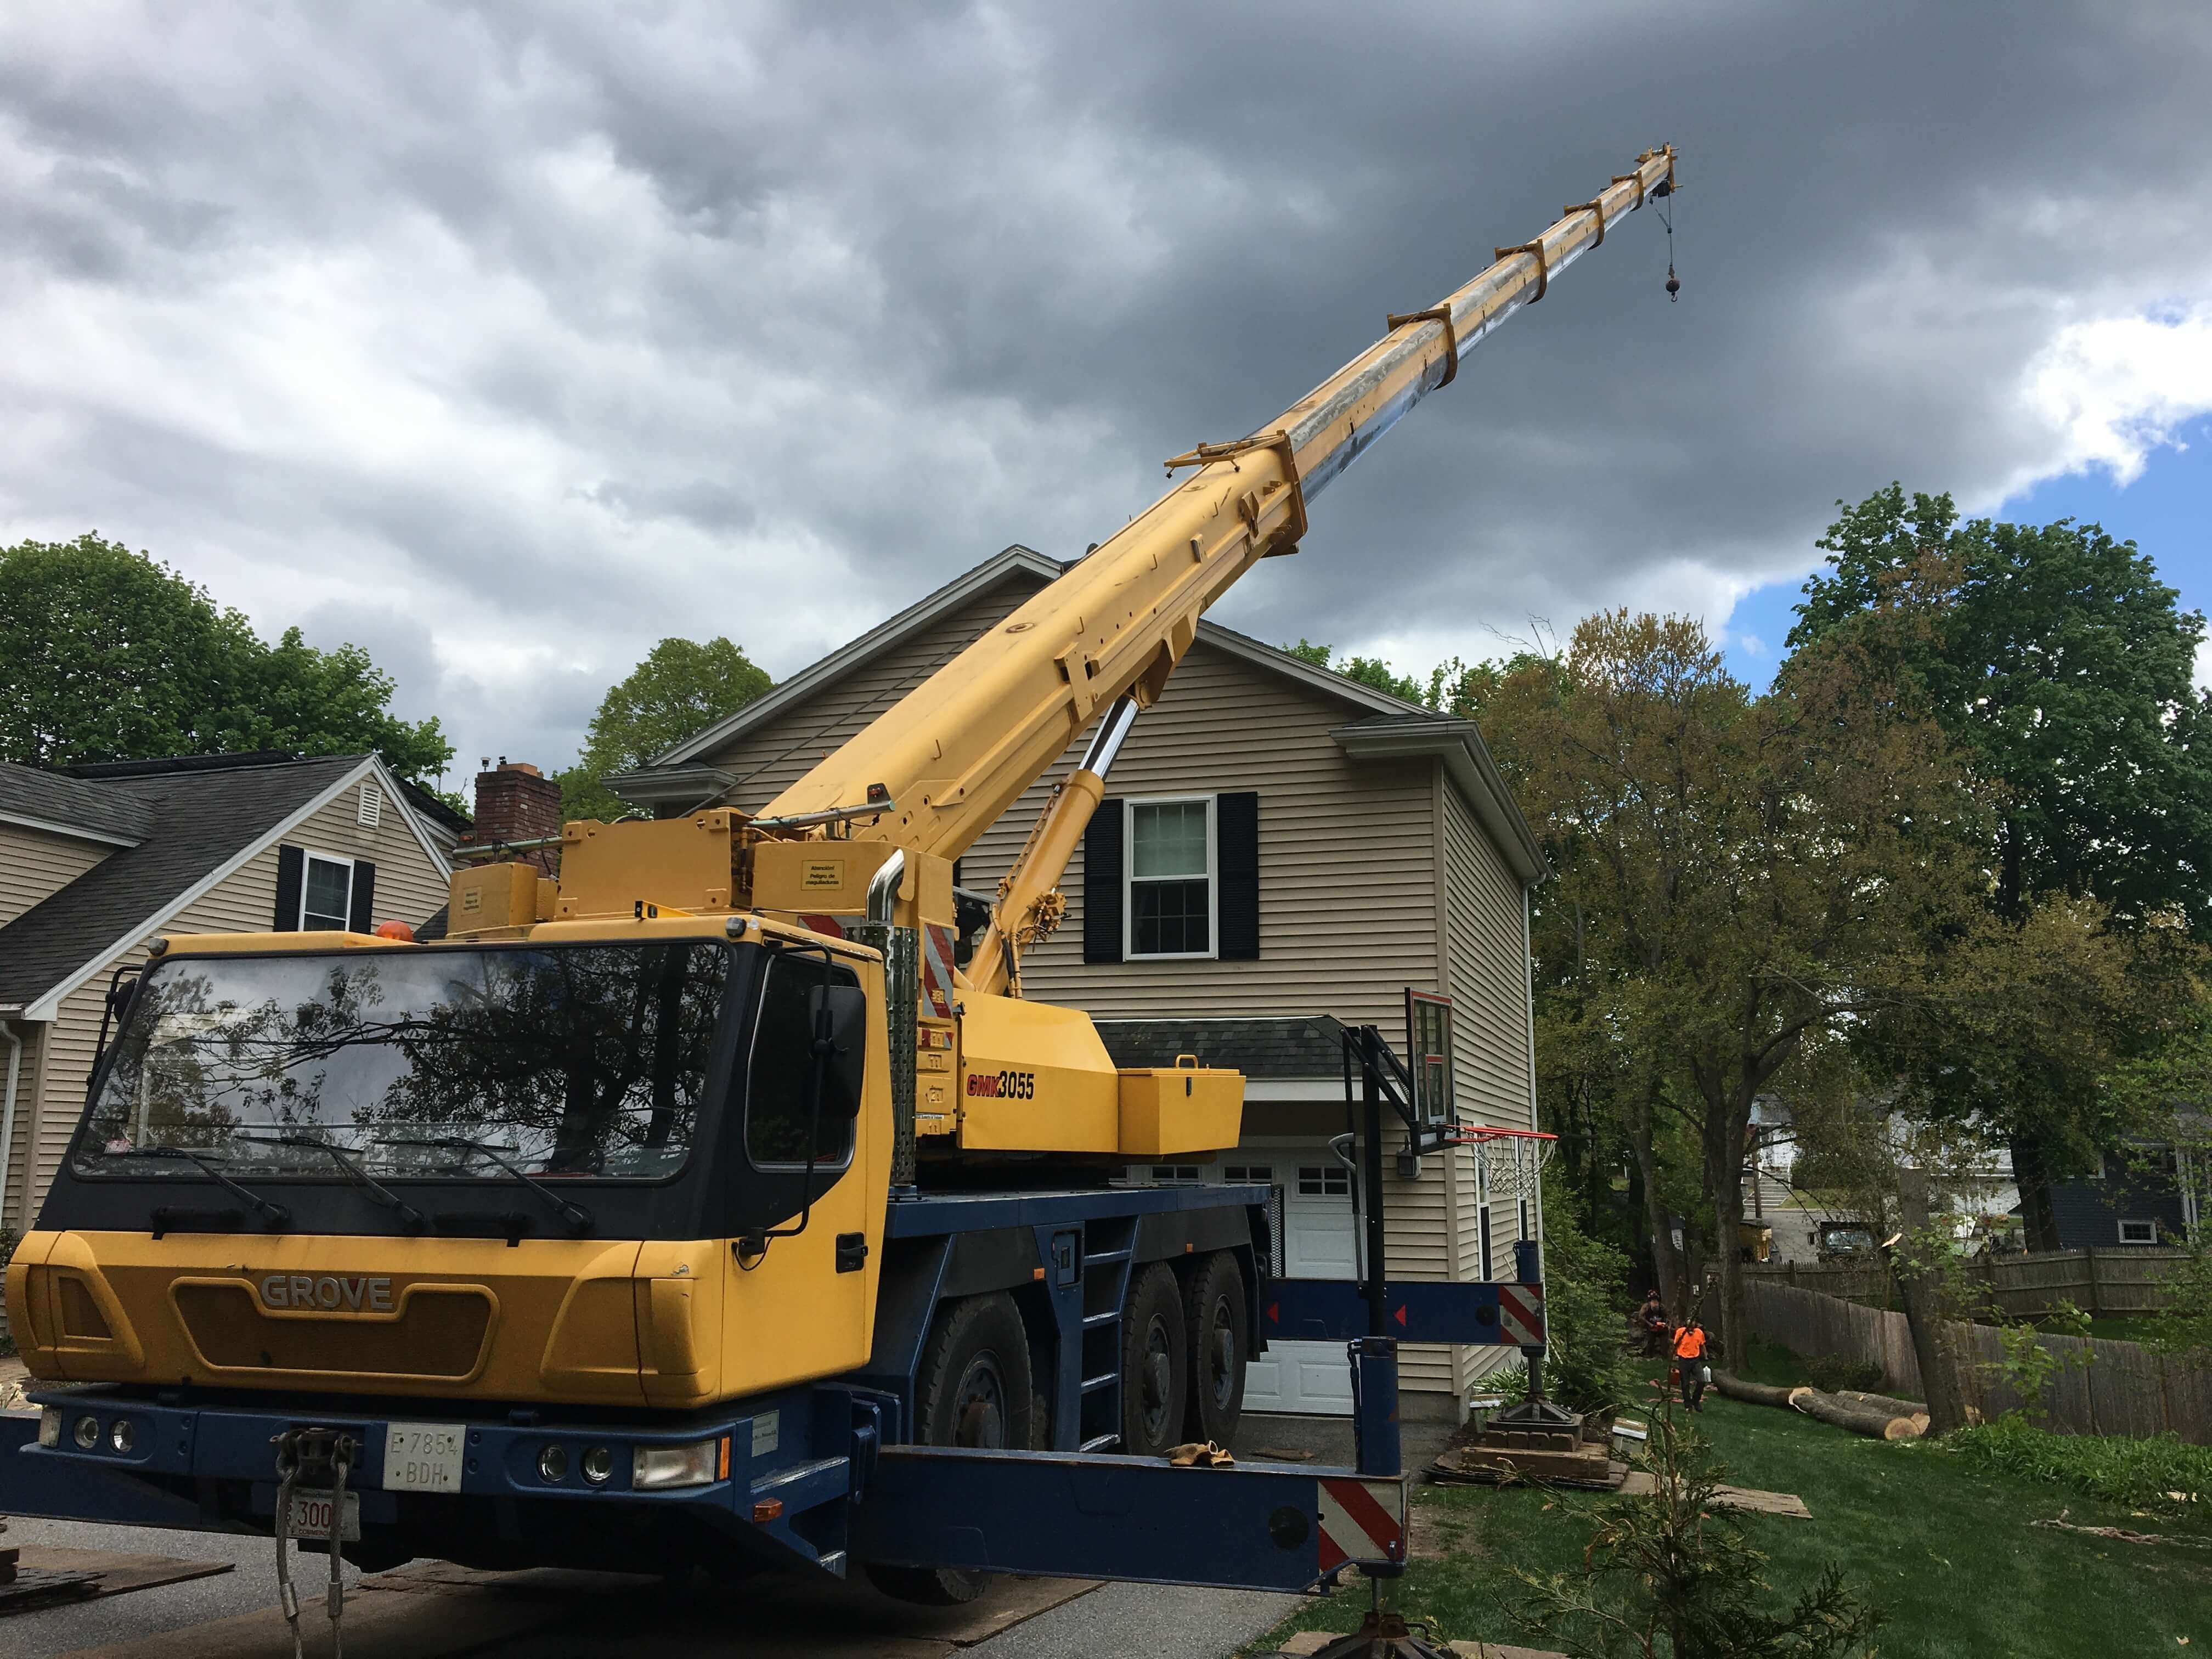 Middlesex Tree Service can handle any size job